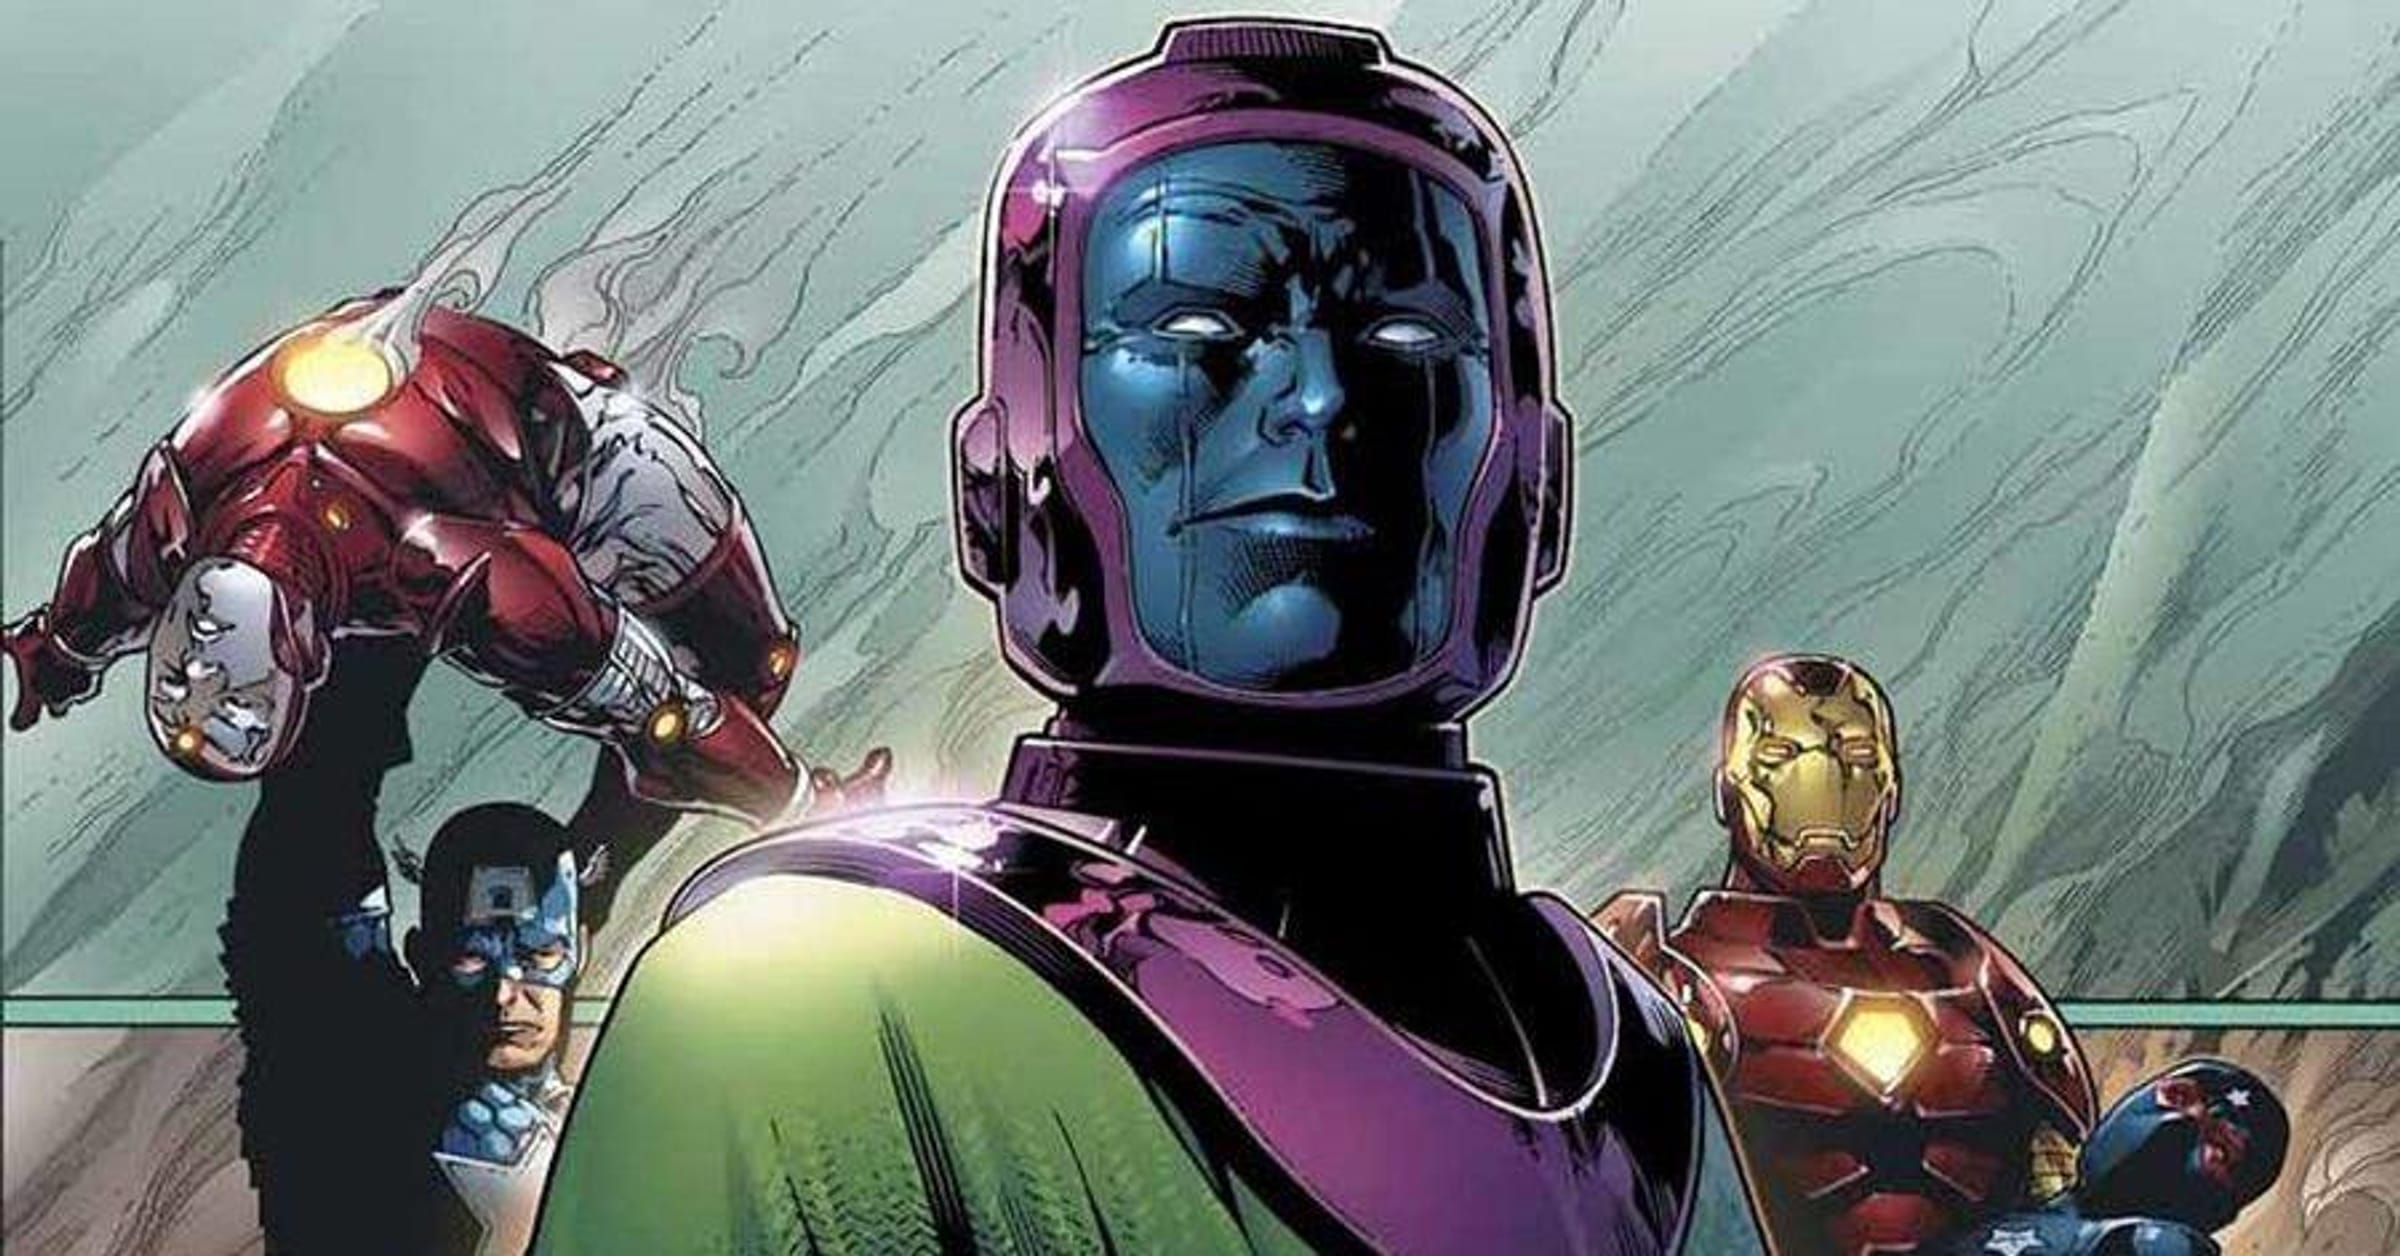 Kang the Conqueror: Everything to know about Marvel's new